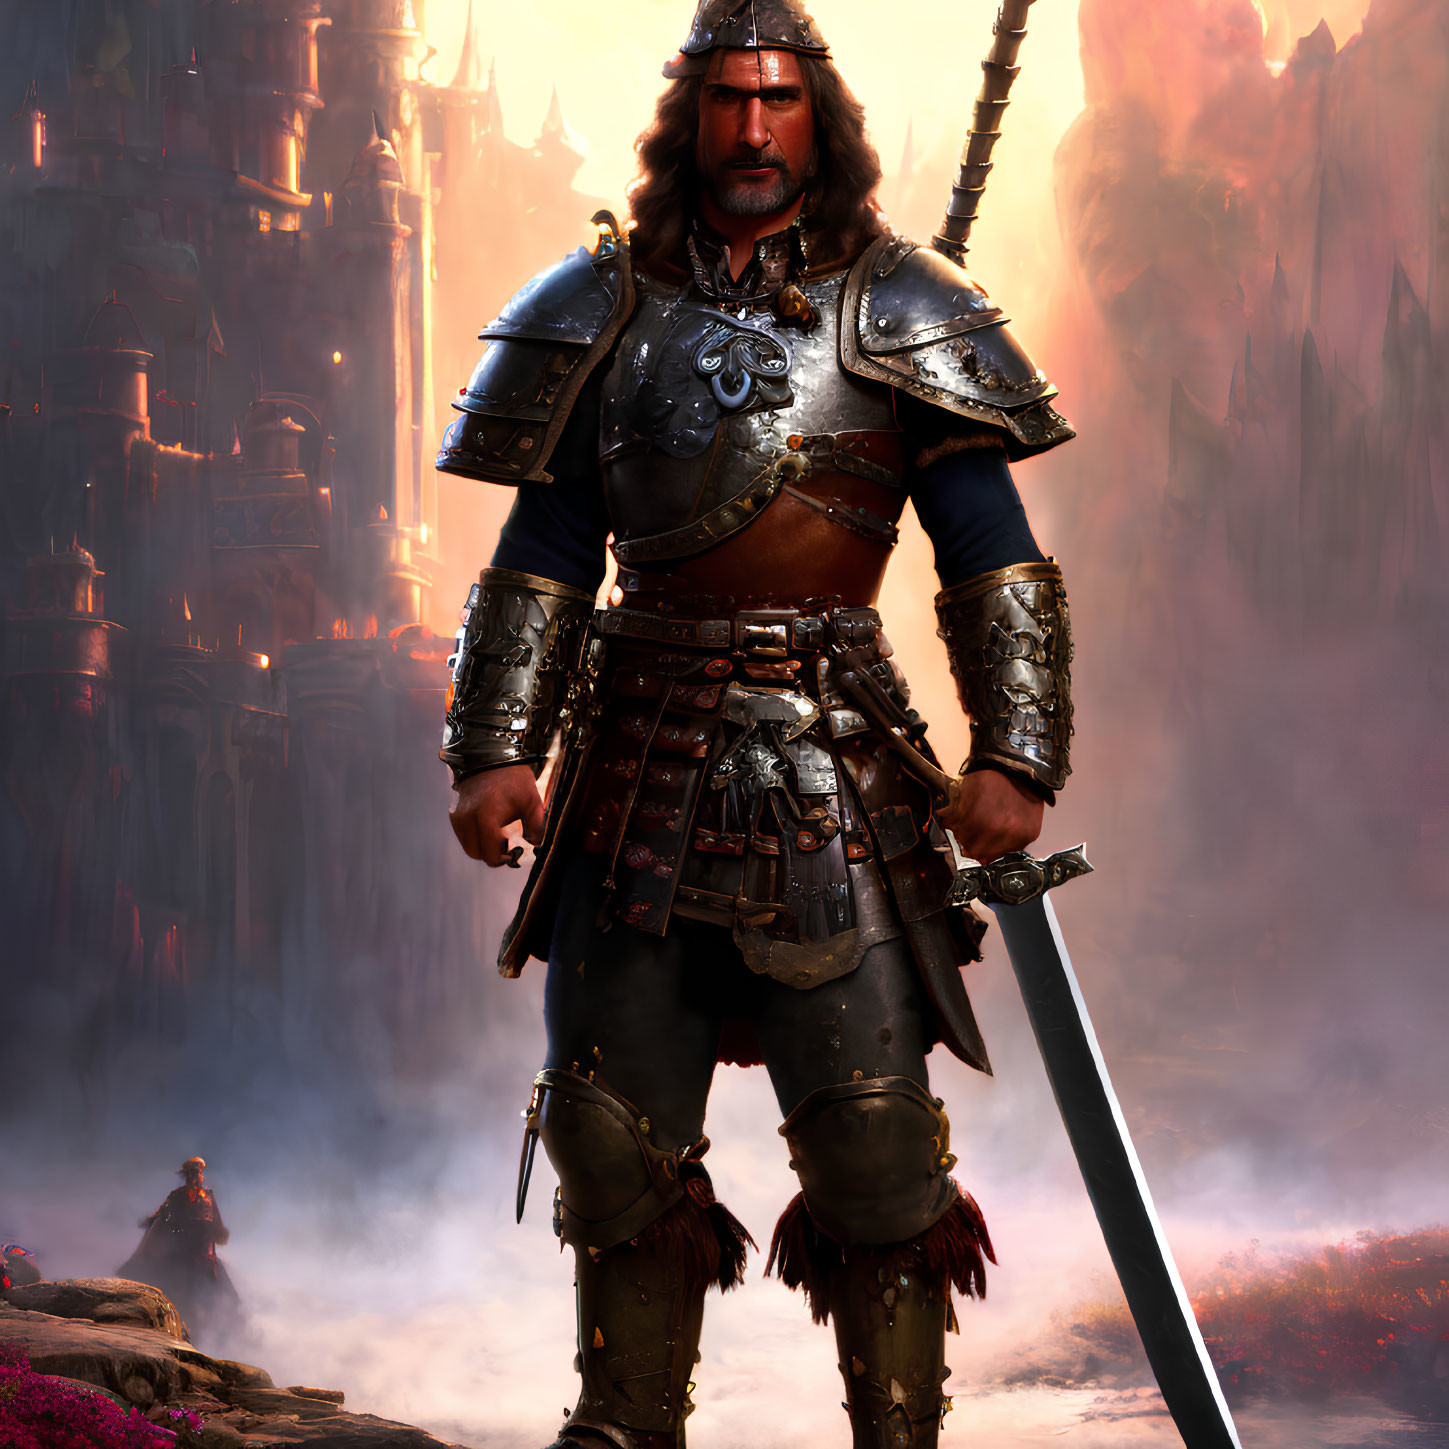 Ornate armored knight with sword in mystical castle backdrop